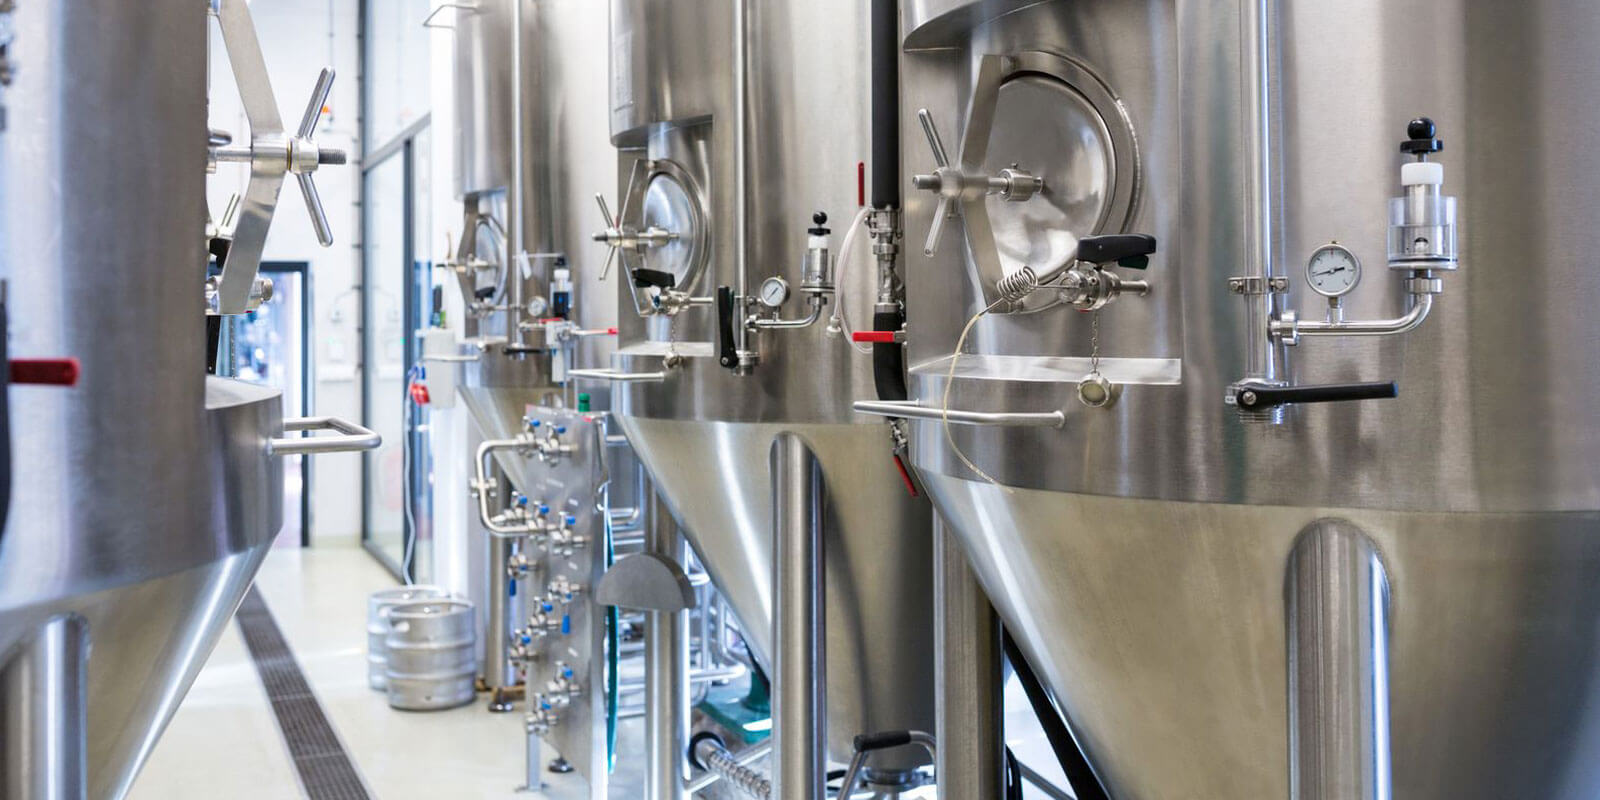 A leading supplier of brewing ingredients unfolds a personalized buying journey